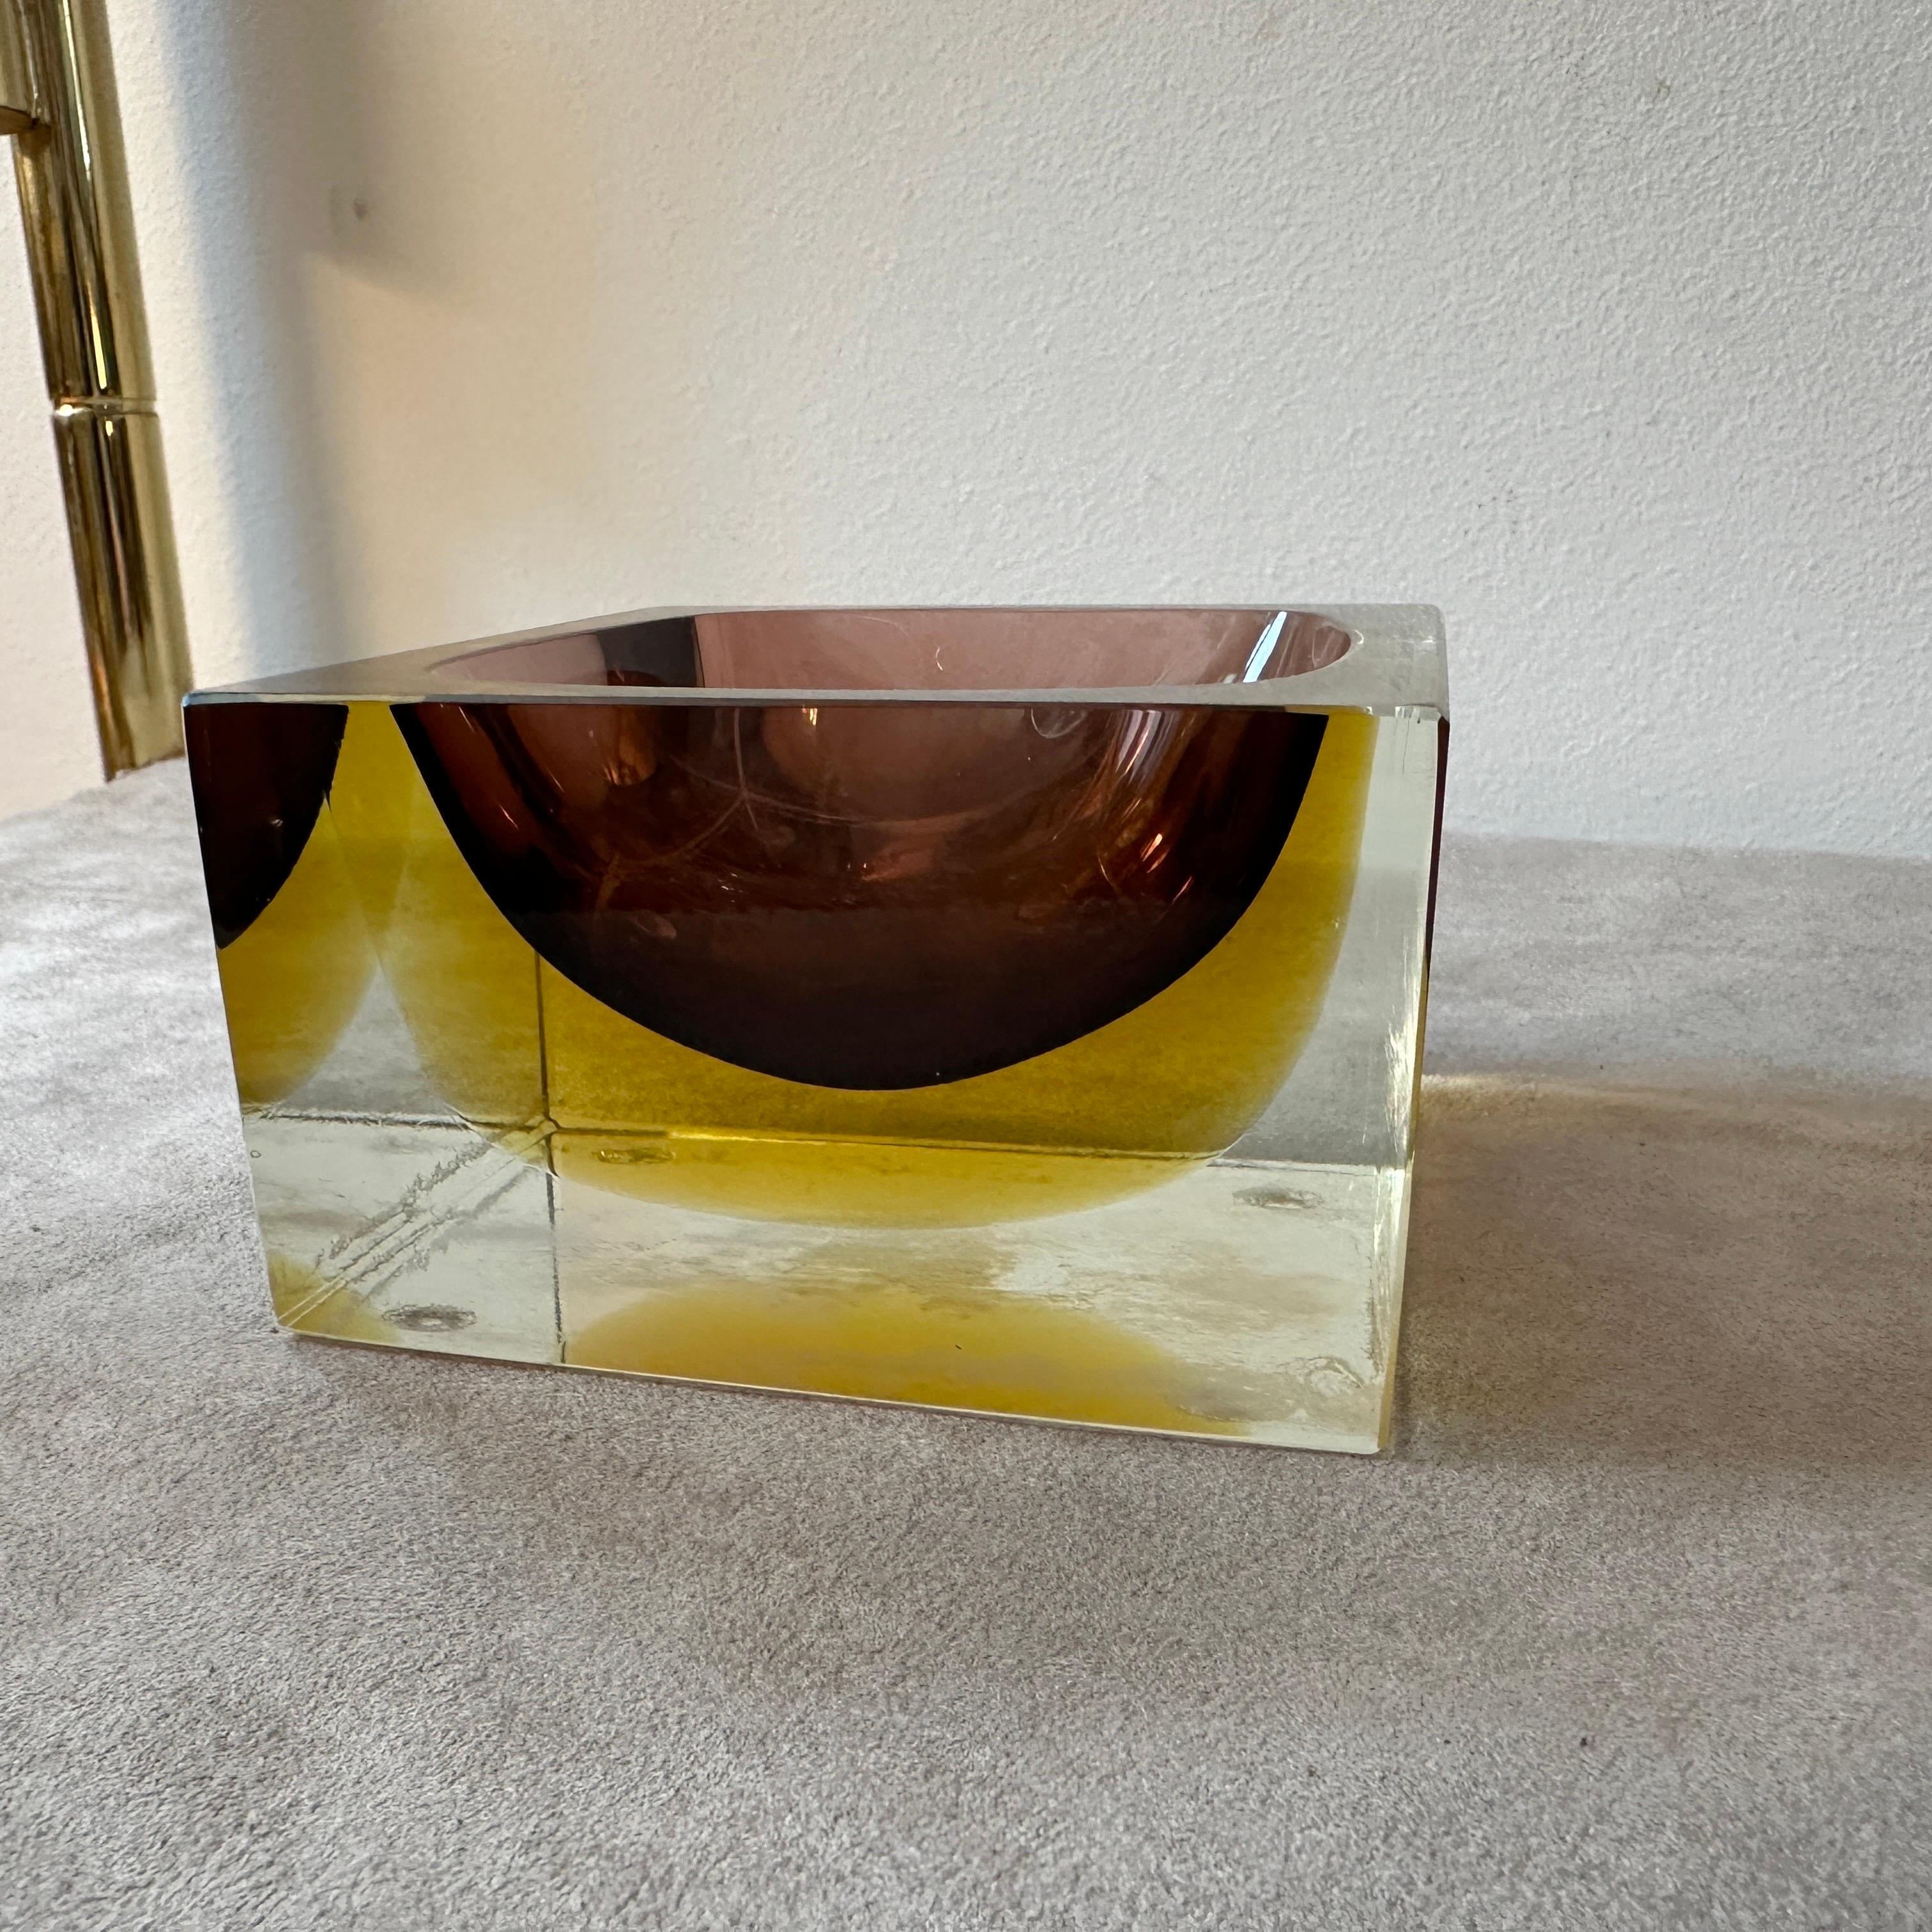 Italian 1970s Modernist Yellow and Brown Sommerso Murano Glass Ashtray by Mandruzzato For Sale